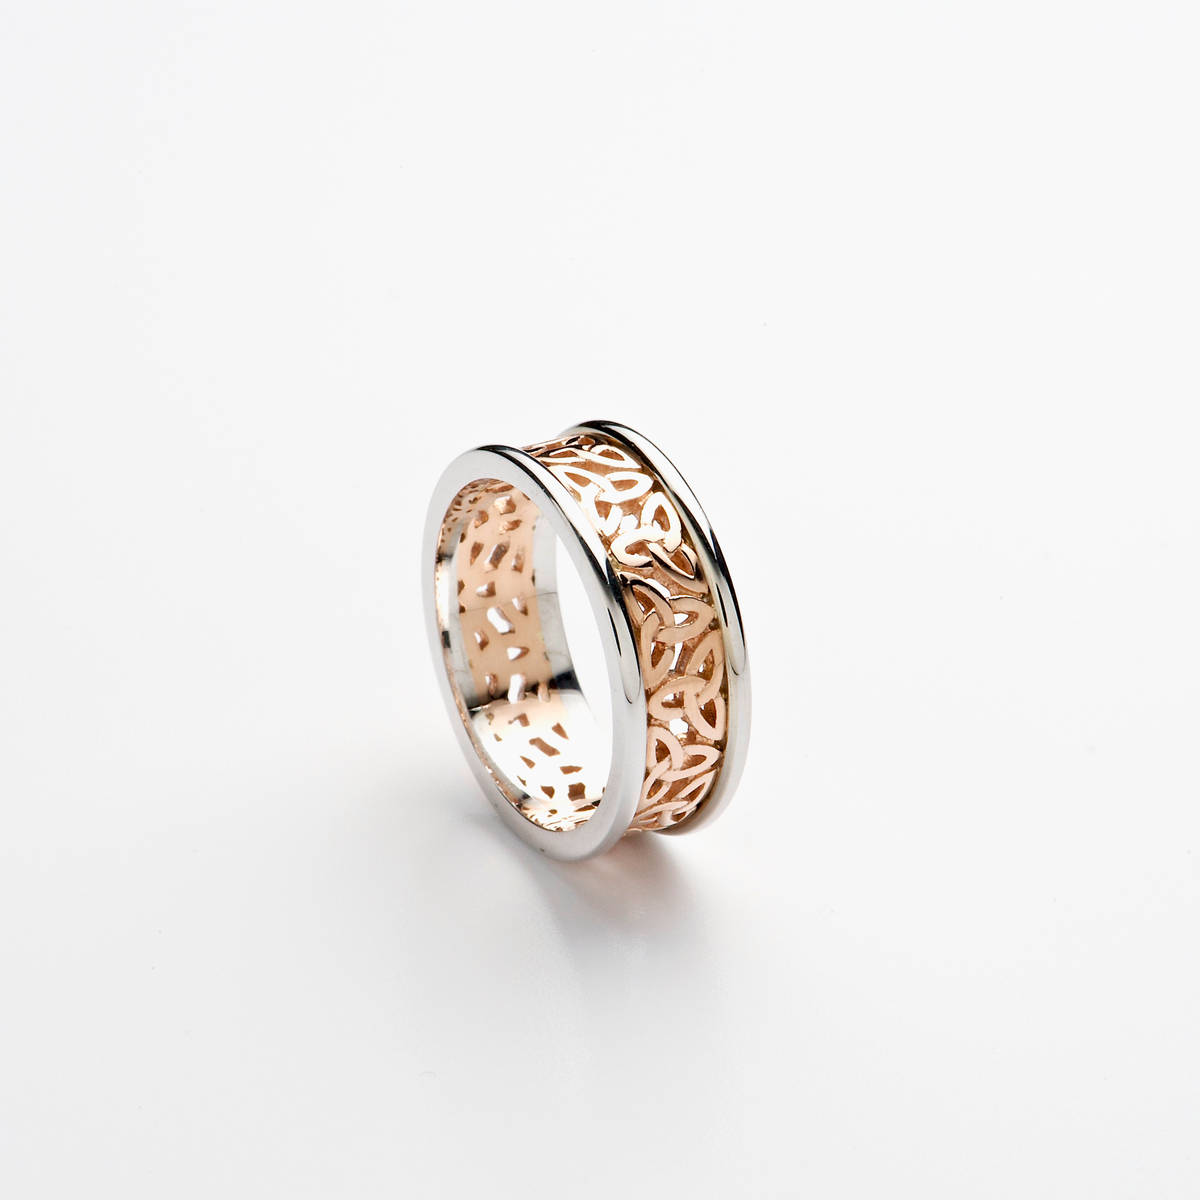 14ct rose gold ladies wedding band with light rose gold open Trinity Knot centre, and white gold heavy rims. 

Fit: Universal comfort
Width: 7.2 mm
Profile: D-Shape